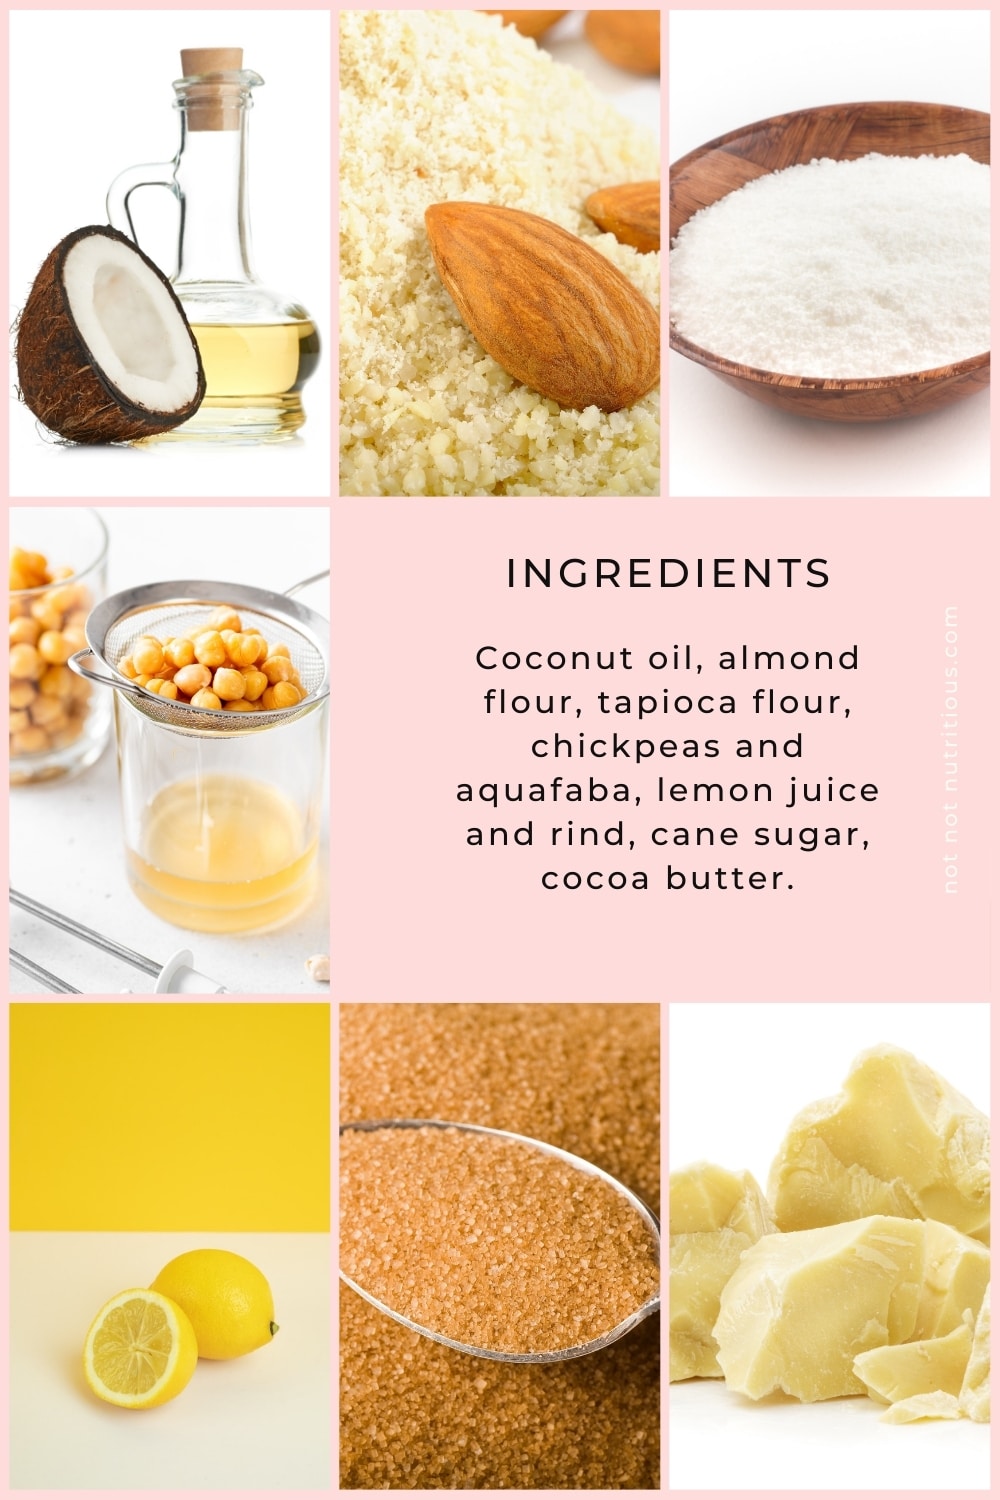 Infographic with ingredients for Baked Vegan Lemon Cheesecake: coconut oil, water, almond flour, tapioca flour, chickpeas, aquafaba, lemon juice and rind, cane sugar, cocoa butter.